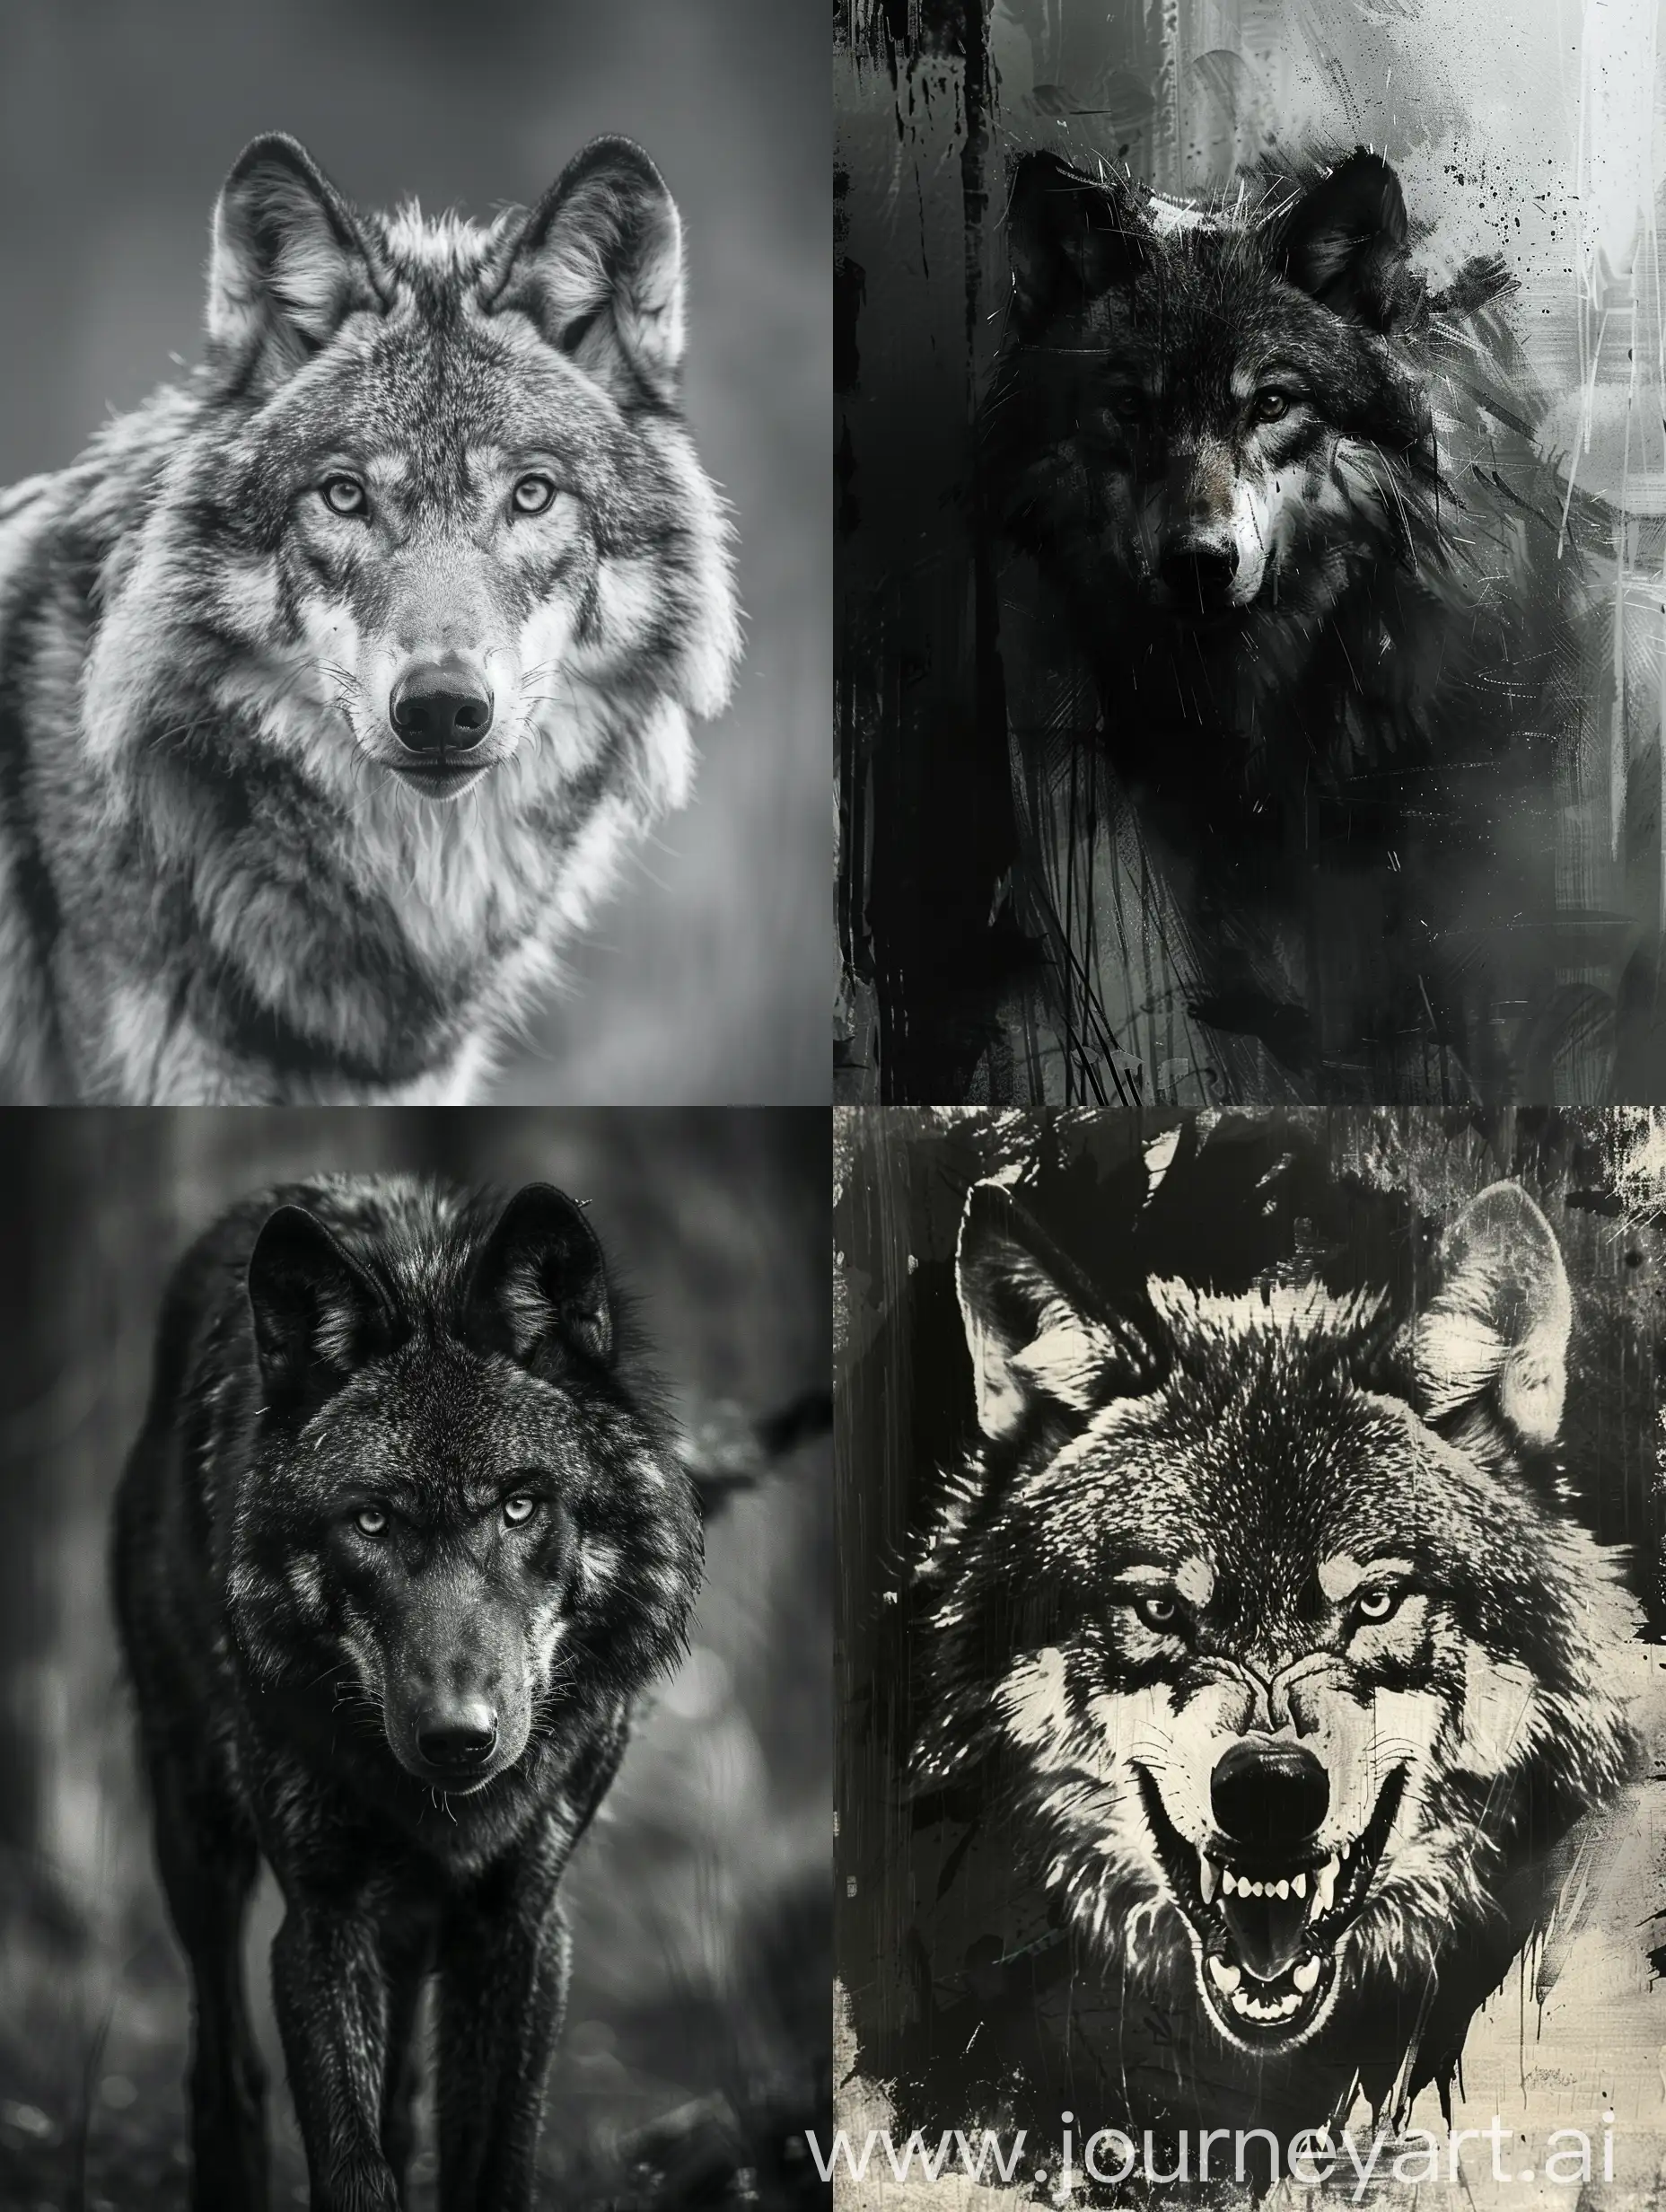 Intimidating-Wolf-Staring-Down-Its-Adversaries-in-Monochrome